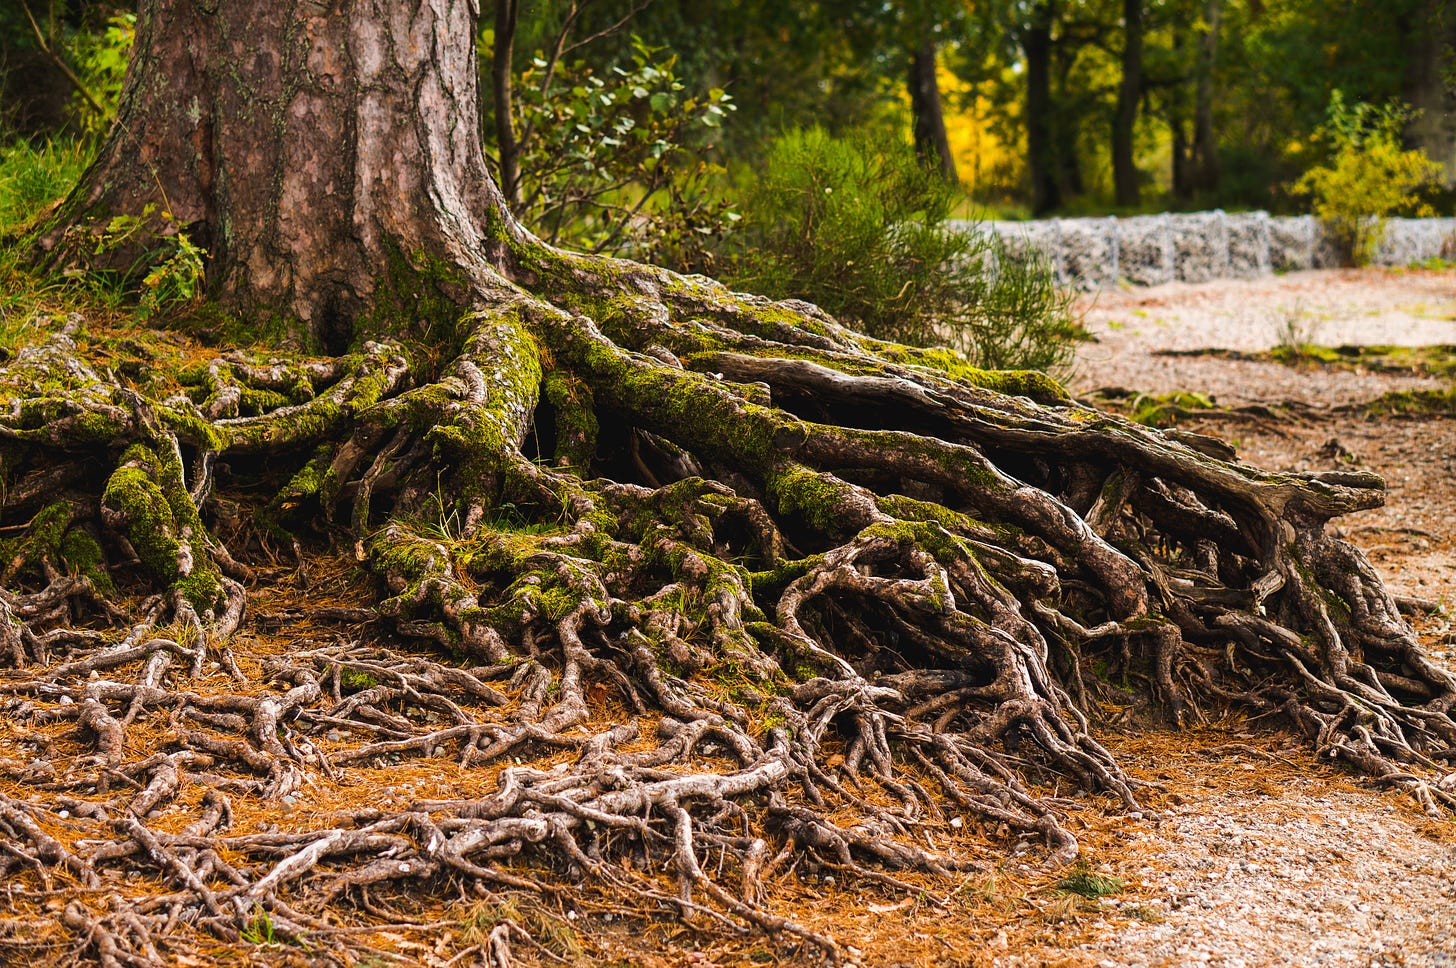 An ancient tree with complex uncovered roots